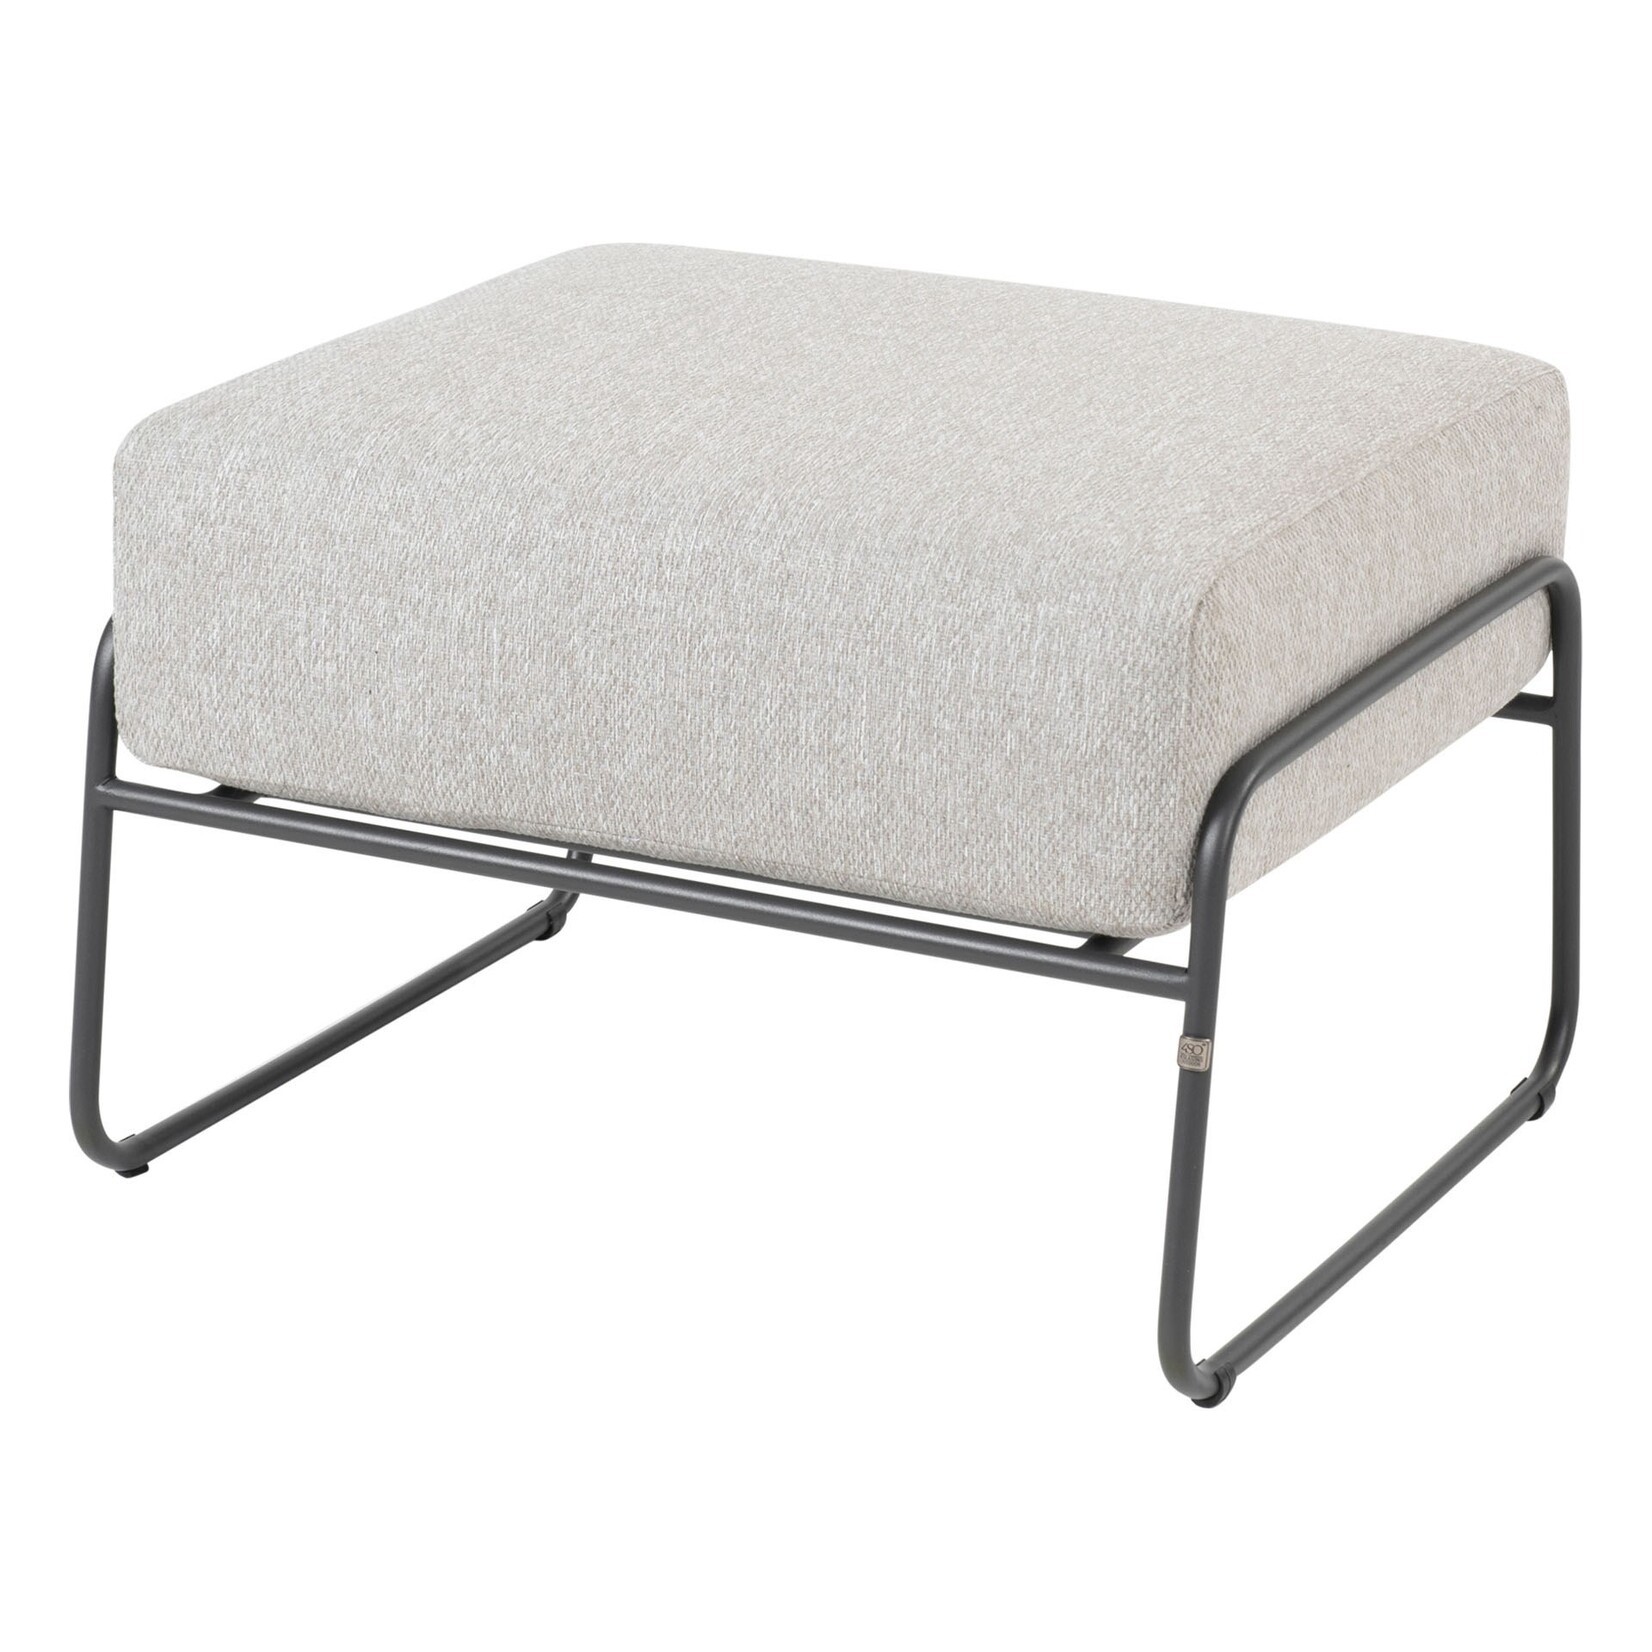 4SO 4SO Balade footstool anthracite with cushion